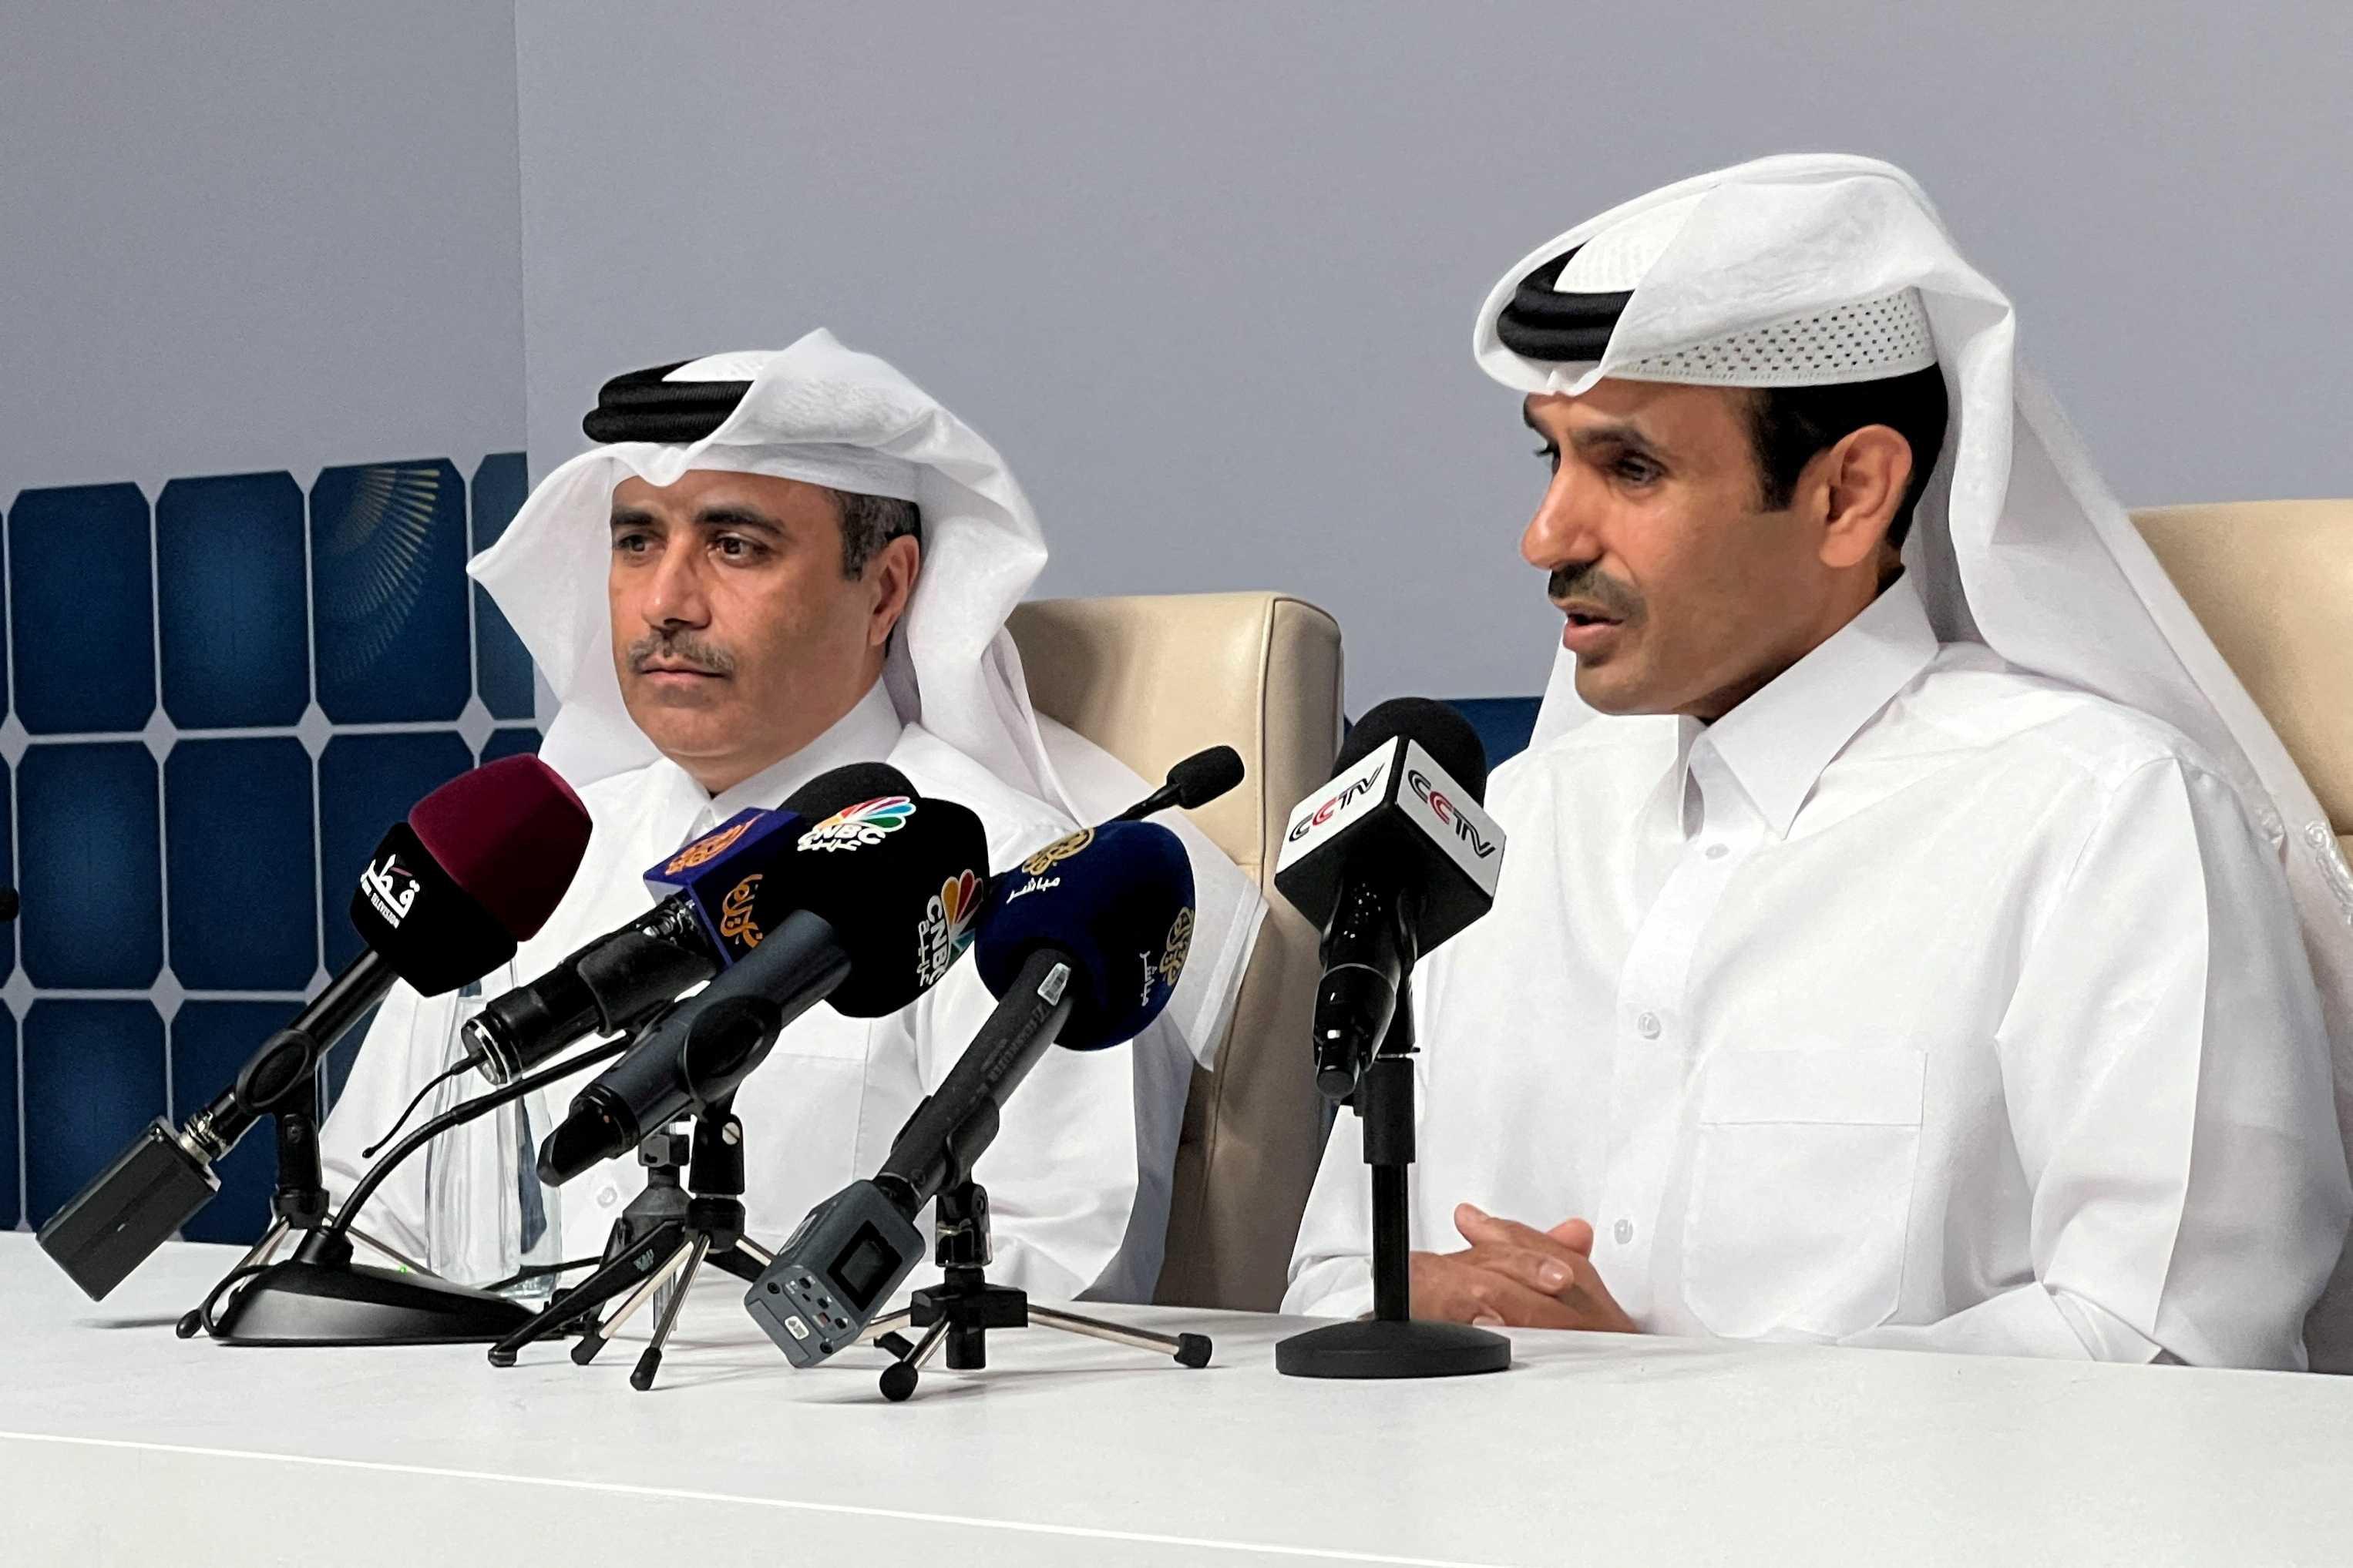 Qatar Energy CEO and Qatar's State Minister for Energy, Saad al-Kaabi, speaks during a news conference at the inauguration event of the Al Kharsaah solar plant project, in Al Kharsaah, Qatar Oct 18. Photo: Reuters